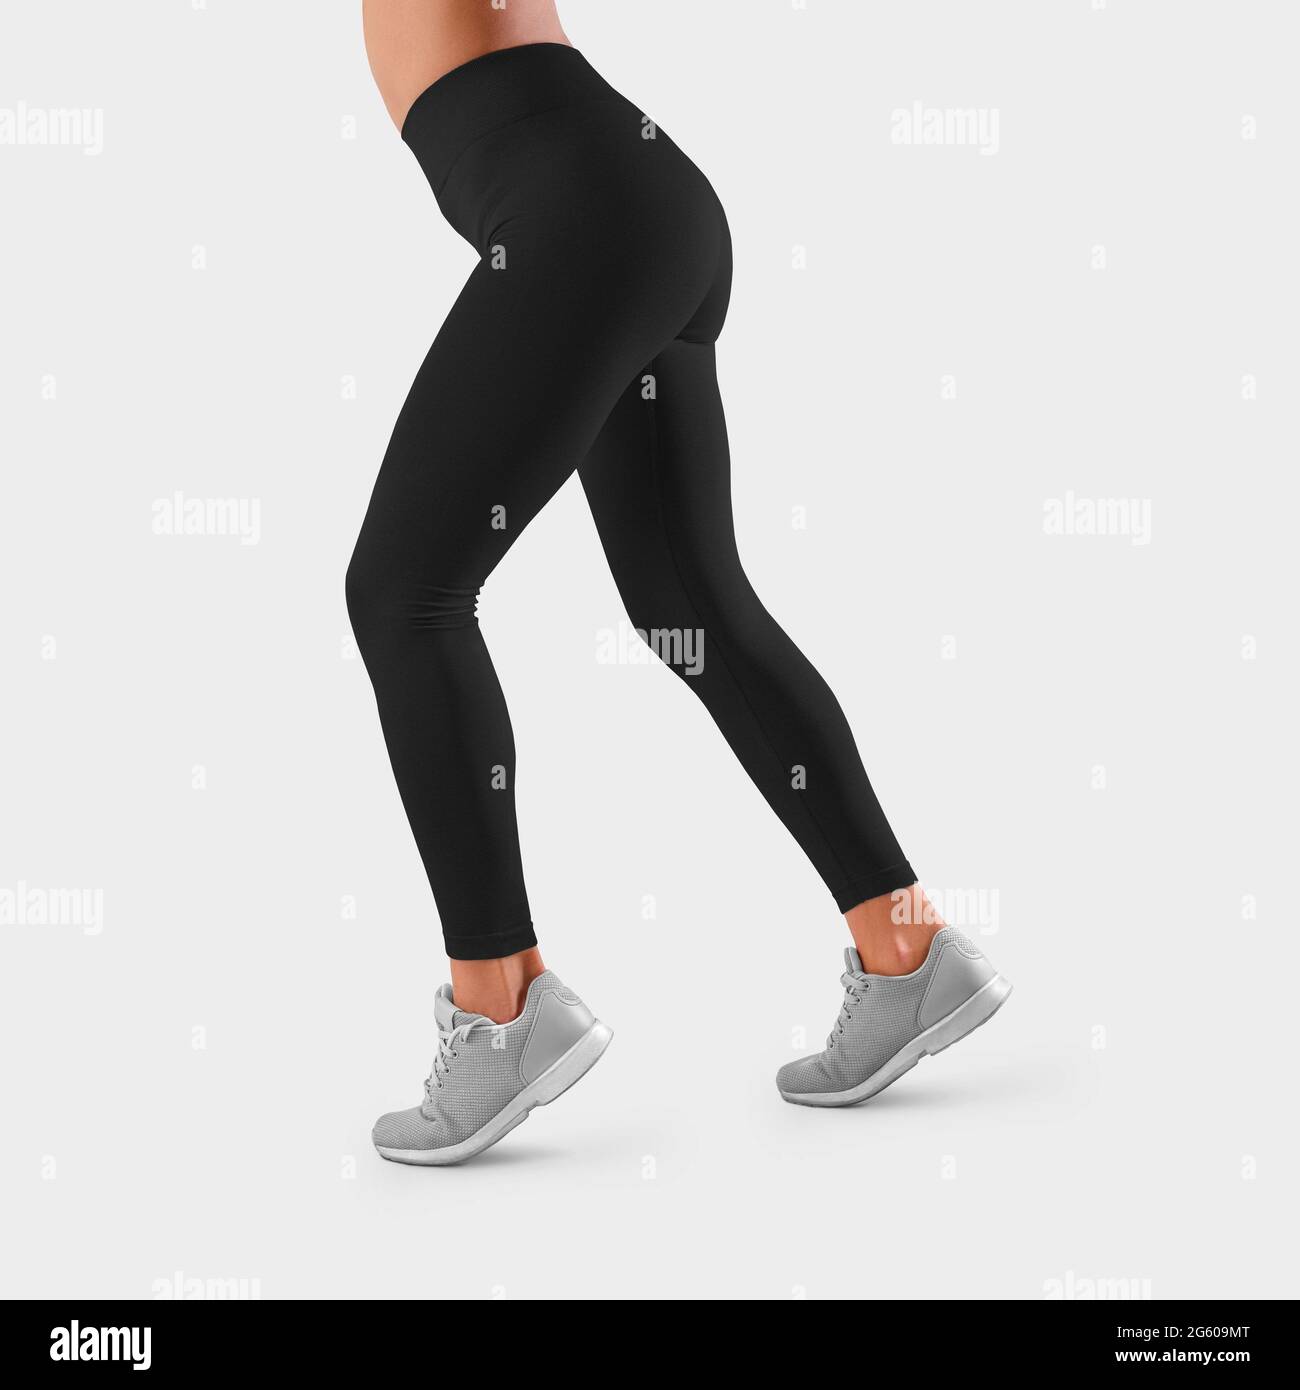 https://c8.alamy.com/comp/2G609MT/template-of-black-tight-fitting-sweatpants-on-the-taut-legs-of-a-girl-running-side-view-mockup-of-fitness-leggings-for-presentation-of-design-patt-2G609MT.jpg